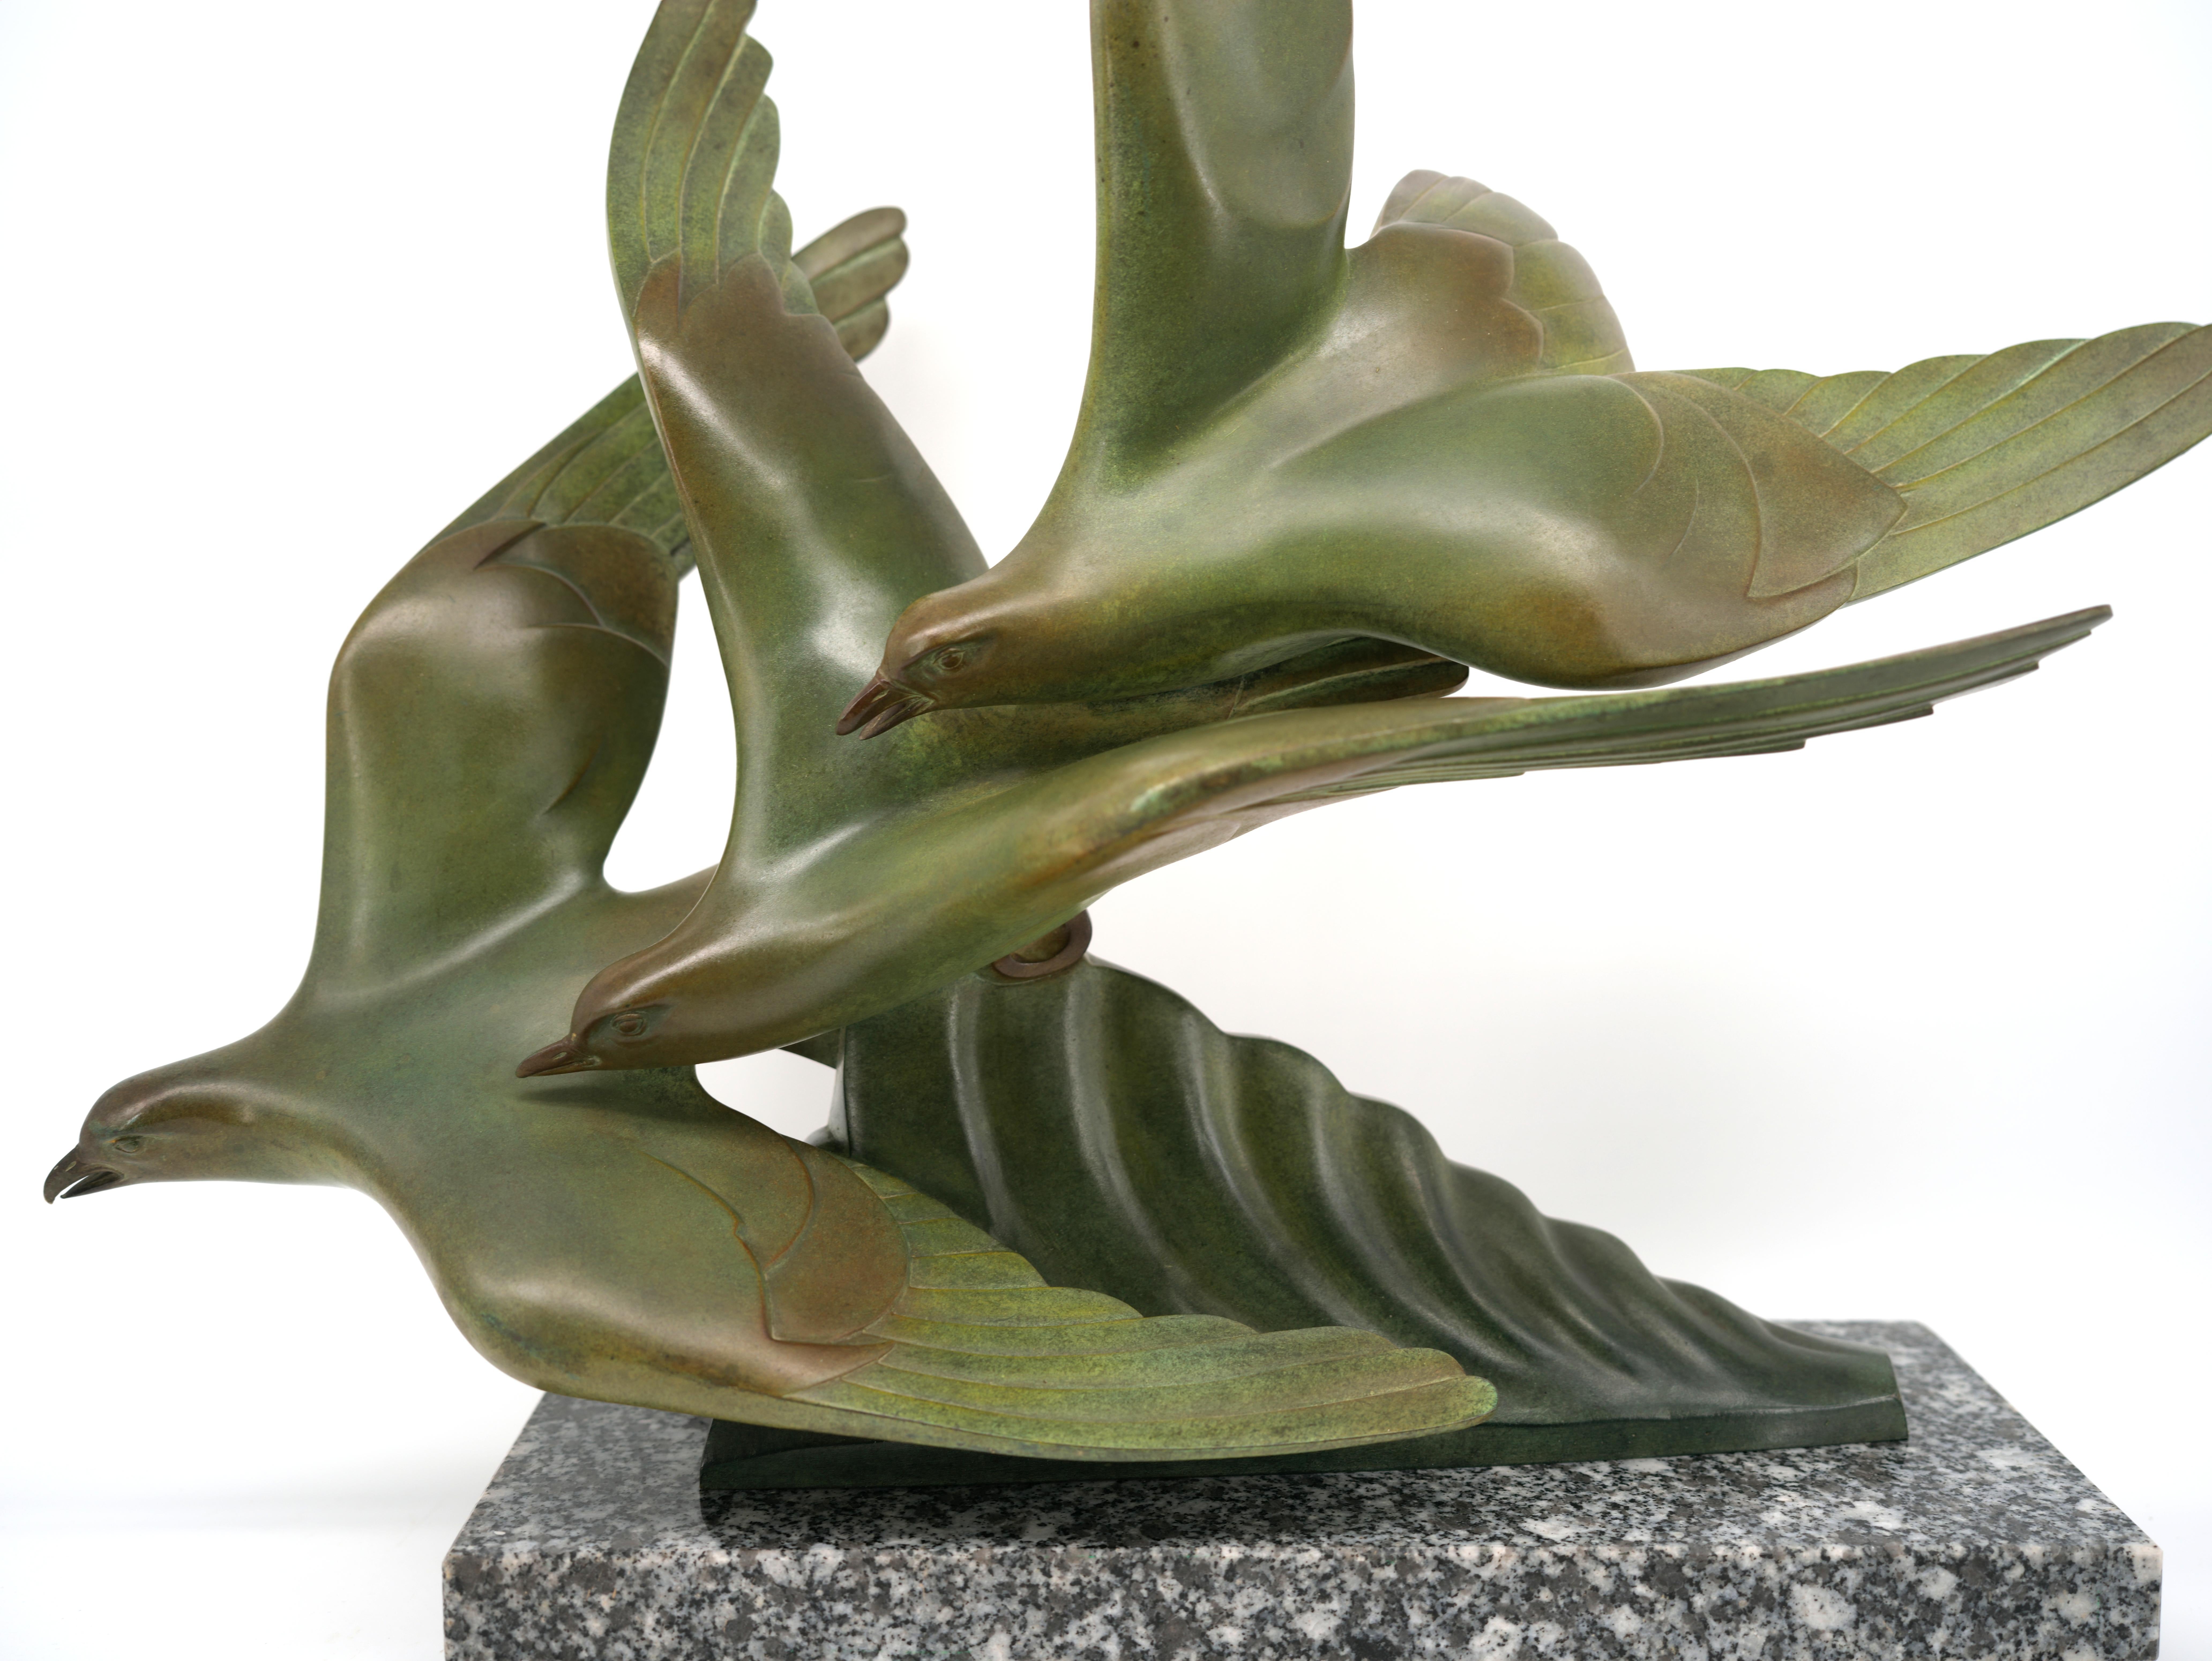 French Art Deco 3 seagulls bronze sculpture by Richard FATH (1900-1952), France, 1930s. Granite base. Width : 22